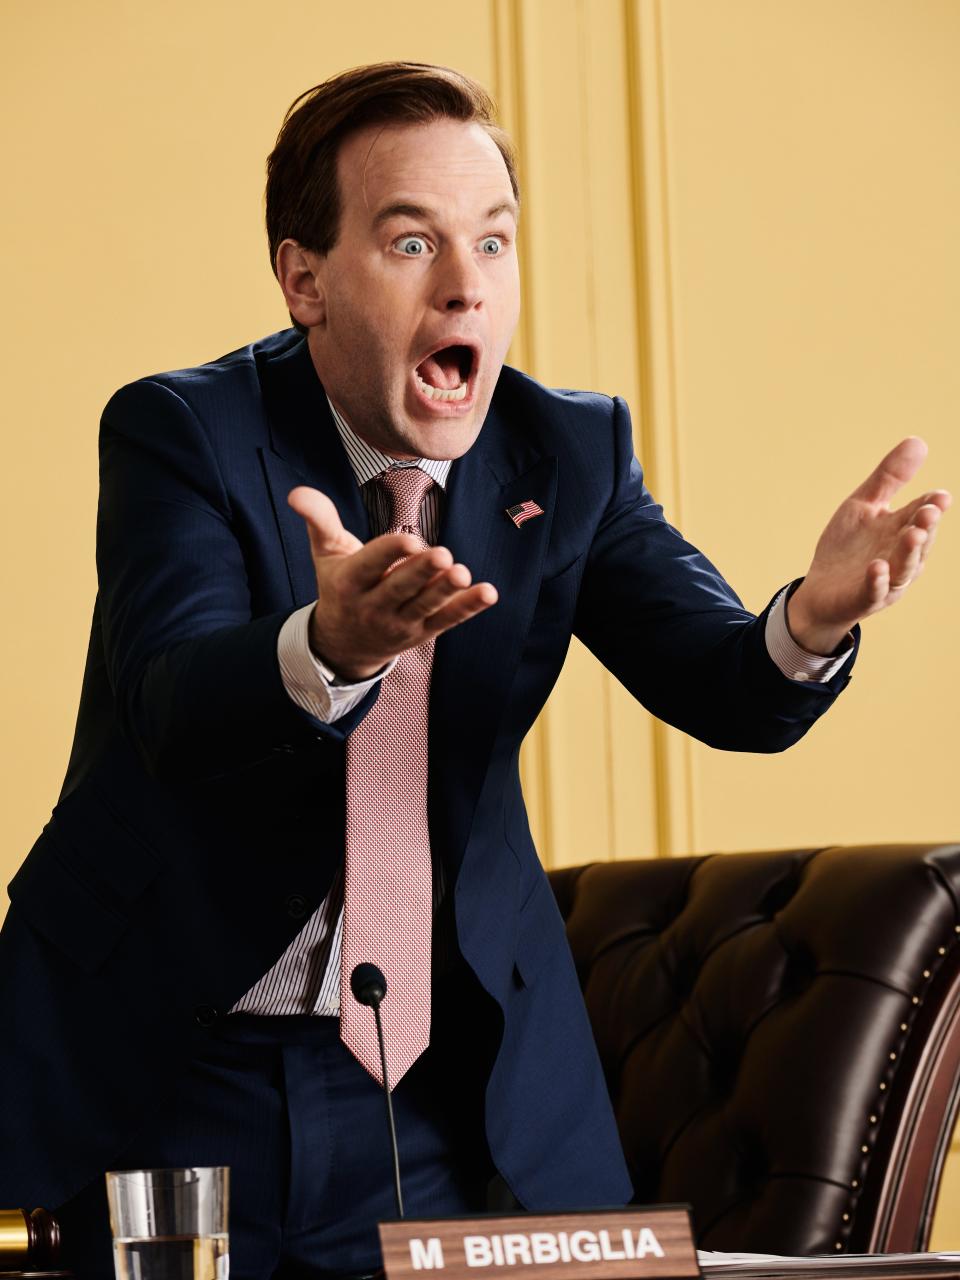 In 2018, no one is clear what the line is between what’s pushing the boundaries of comedy and what’s offensive–and yet we live in an era where a single bad gag can derail a career. So <em>GQ</em> convened a special committee of comedy’s greatest minds—Kathy Griffin, Roy Wood Jr., Mike Birbiglia, Aparna Nancherla, and Hasan Minhaj—to discuss what you can and can’t say anymore.